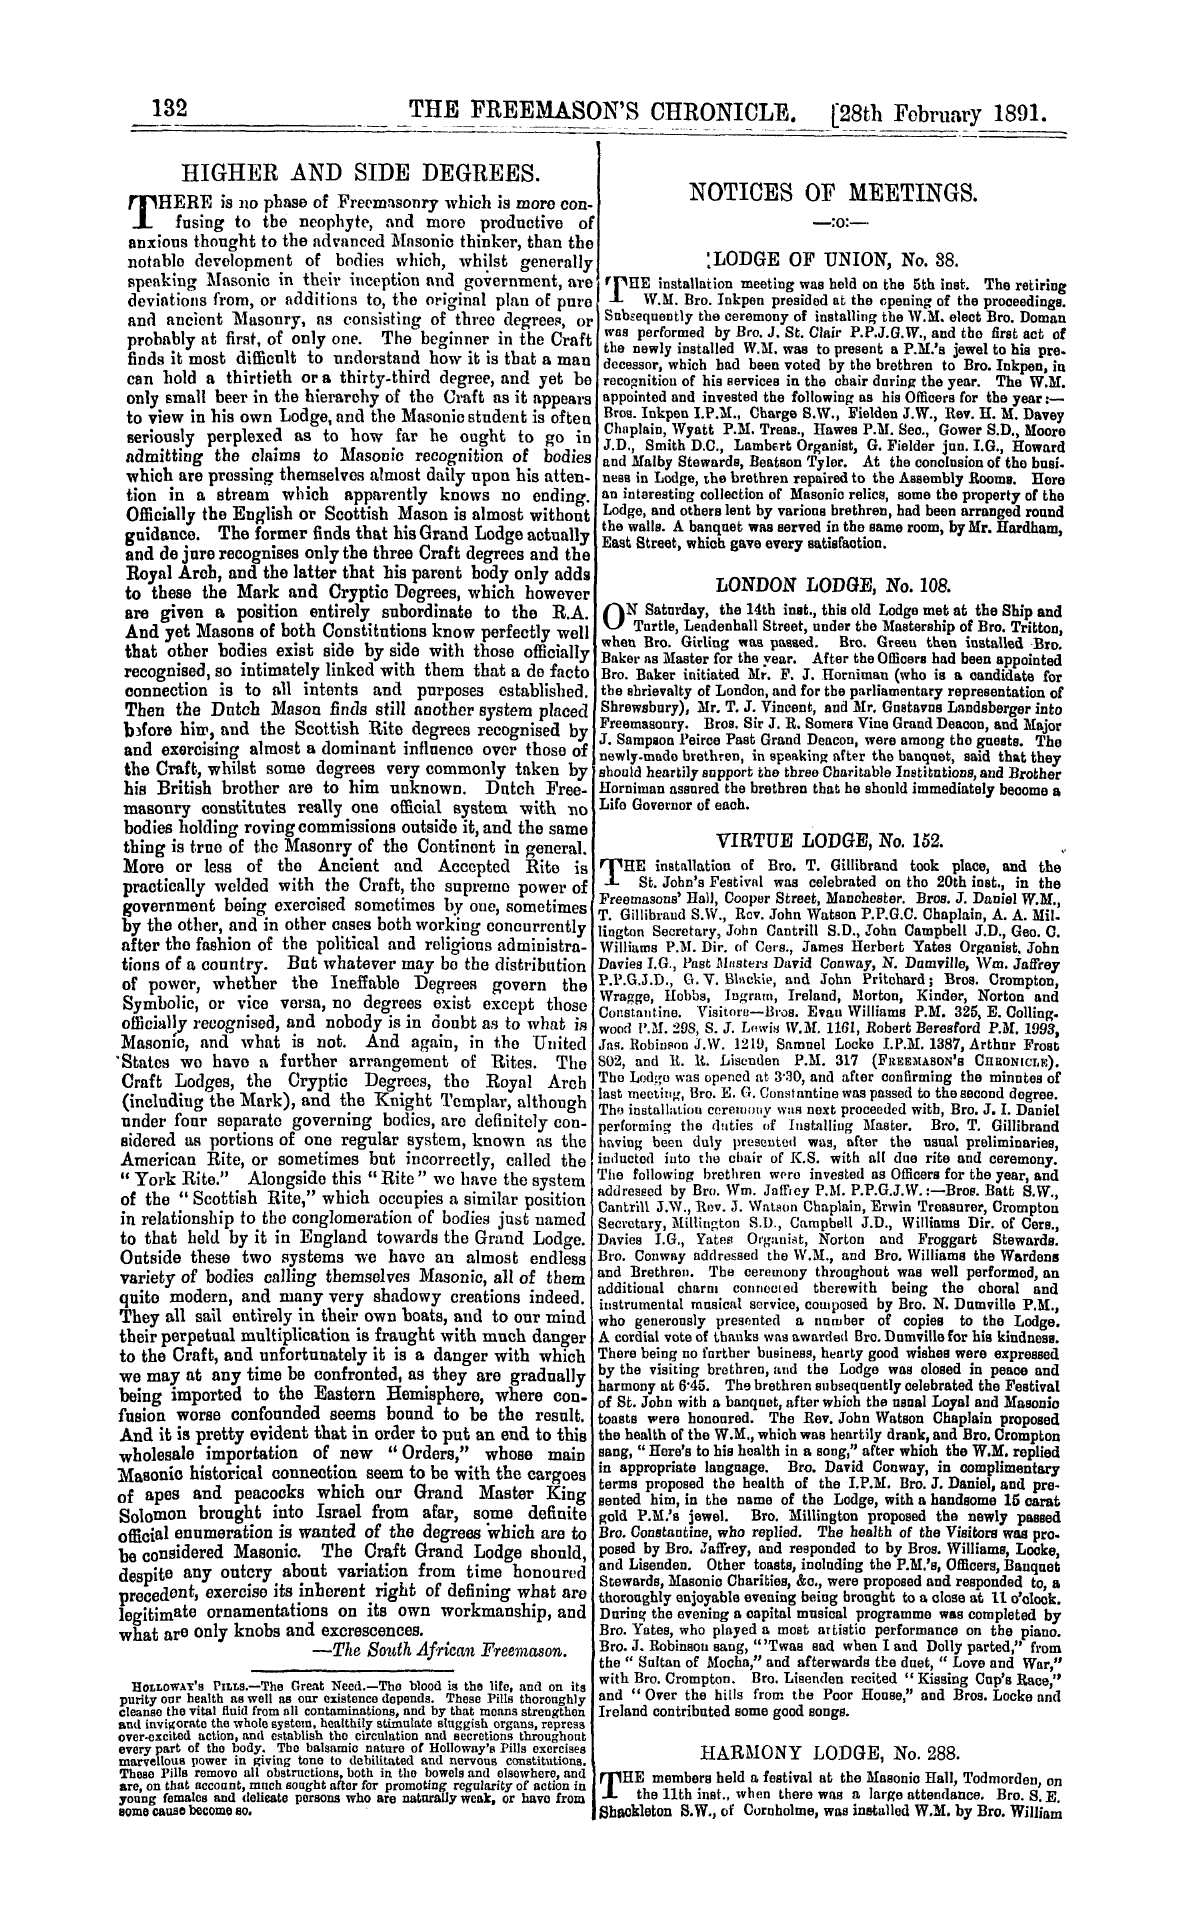 The Freemason's Chronicle: 1891-02-28 - Higher And Side Degrees.